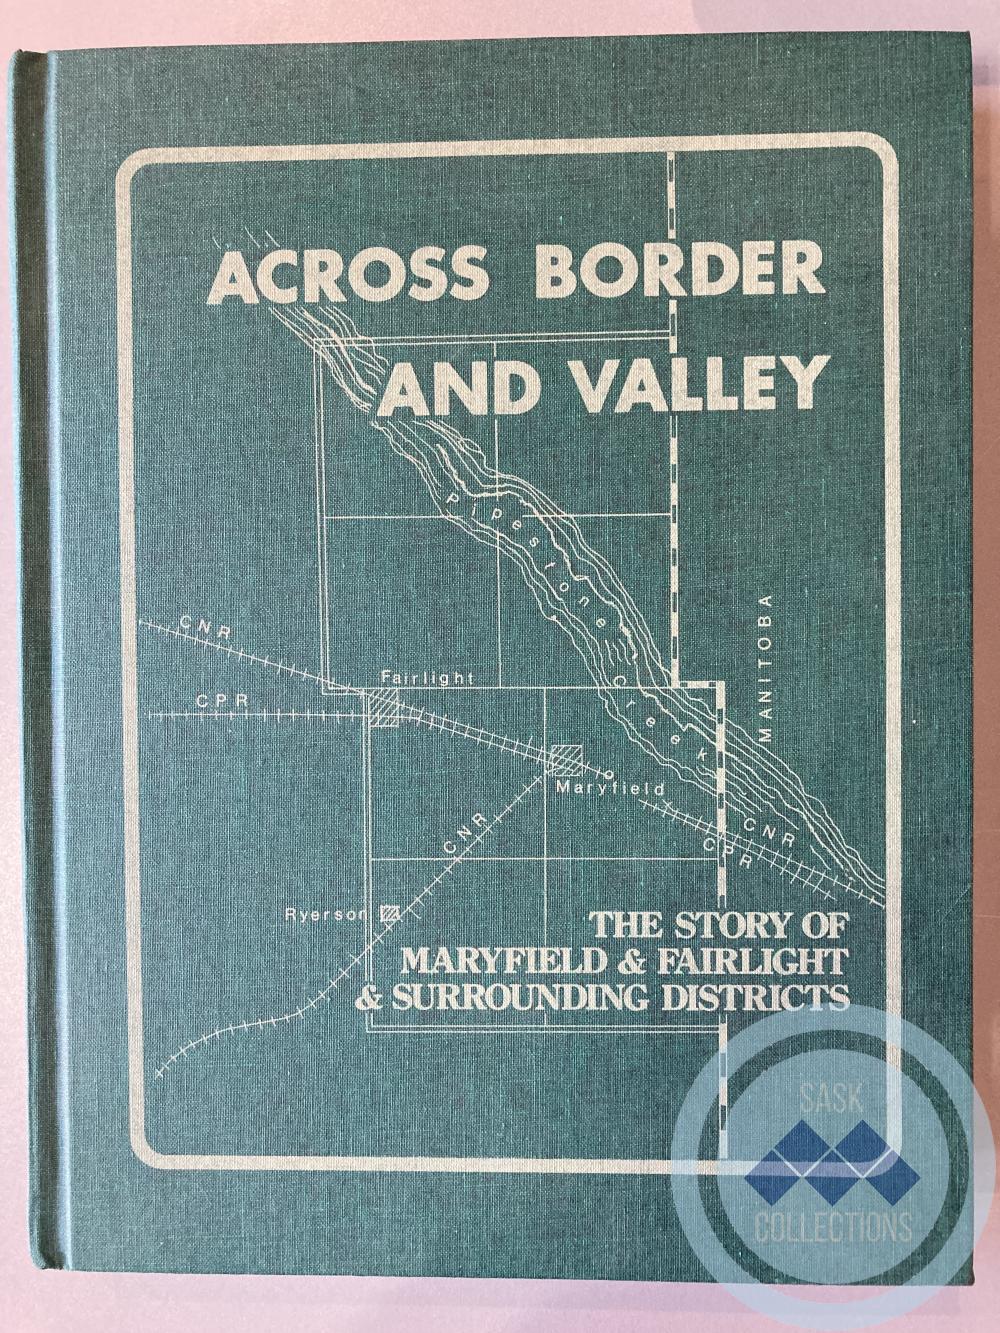 Book - Across Border and Valley; The Story of Maryfield & Fairlight & Surrounding Districts; Volume 1